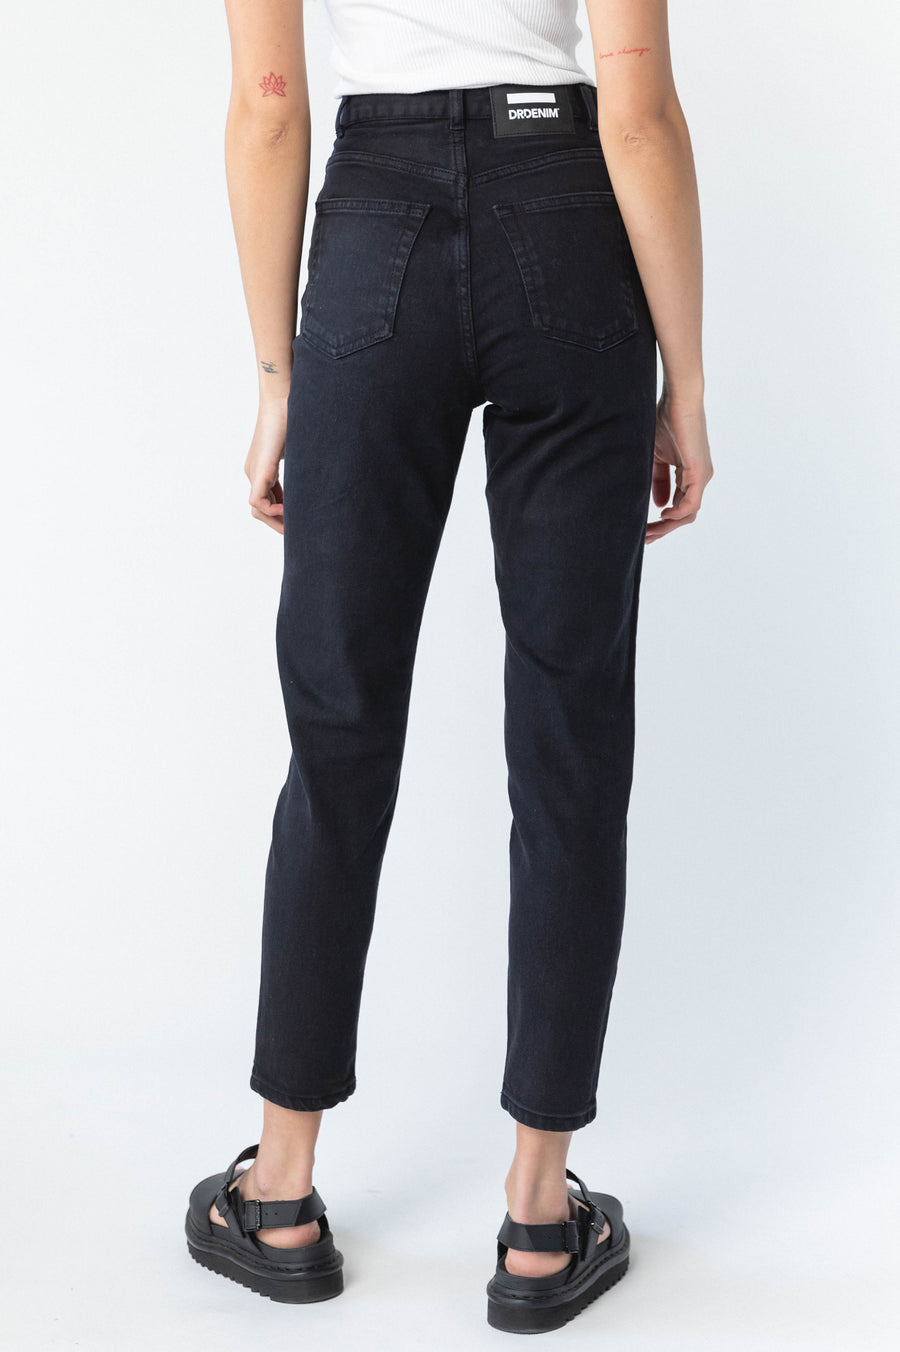 Nora Jeans - Washed Black Stretch